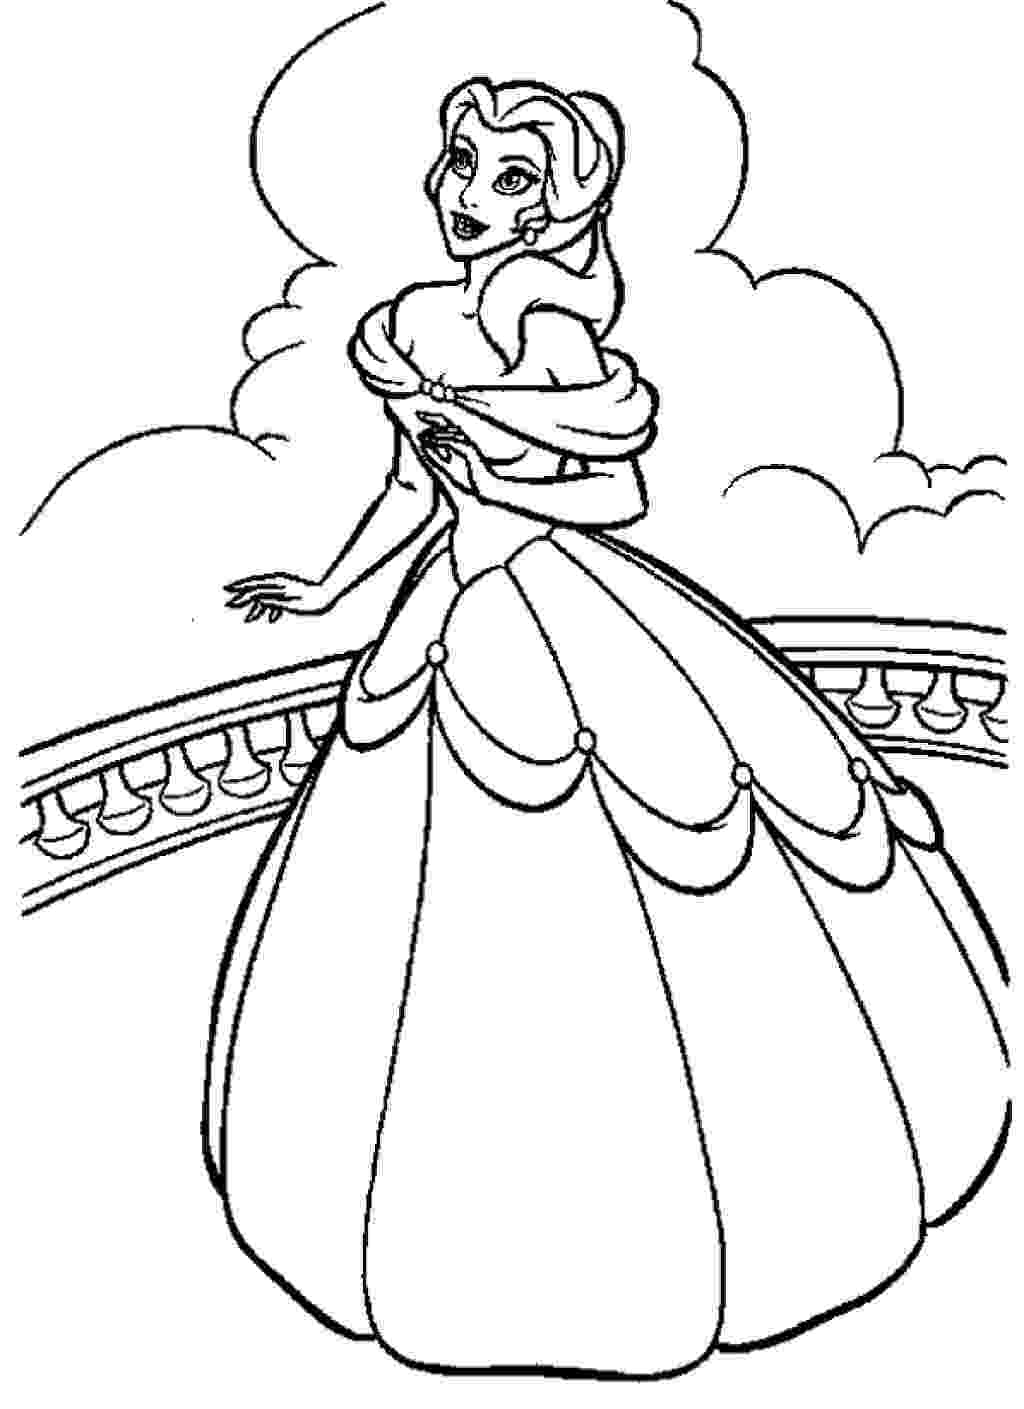 printable coloring pages for disney princess princess coloring pages best coloring pages for kids printable princess for coloring disney pages 